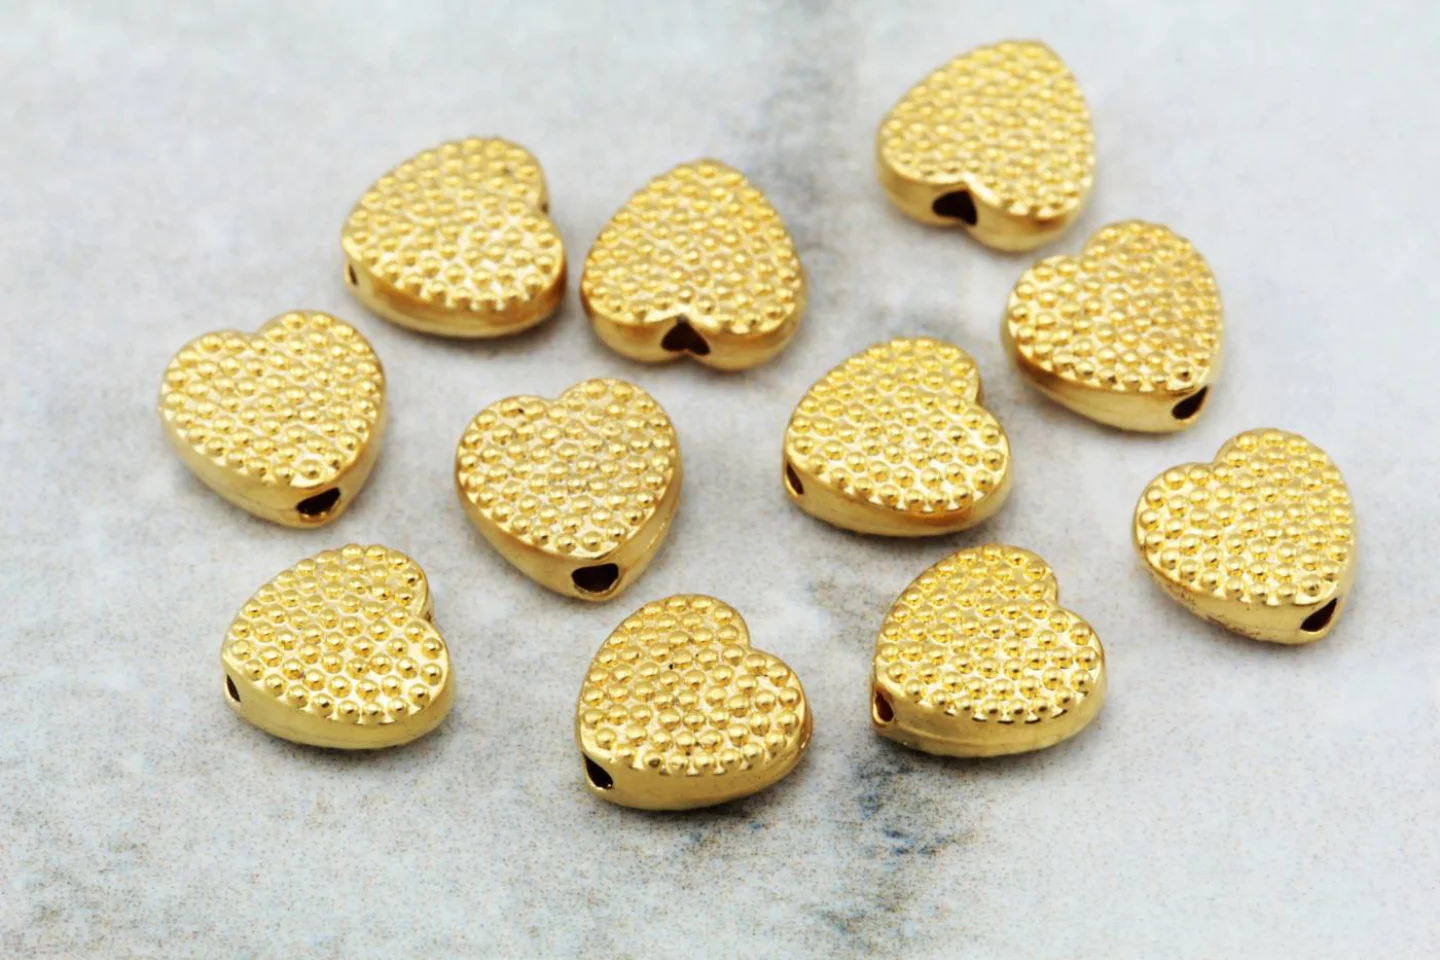 7mm-gold-plated-metal-heart-bead-charms.